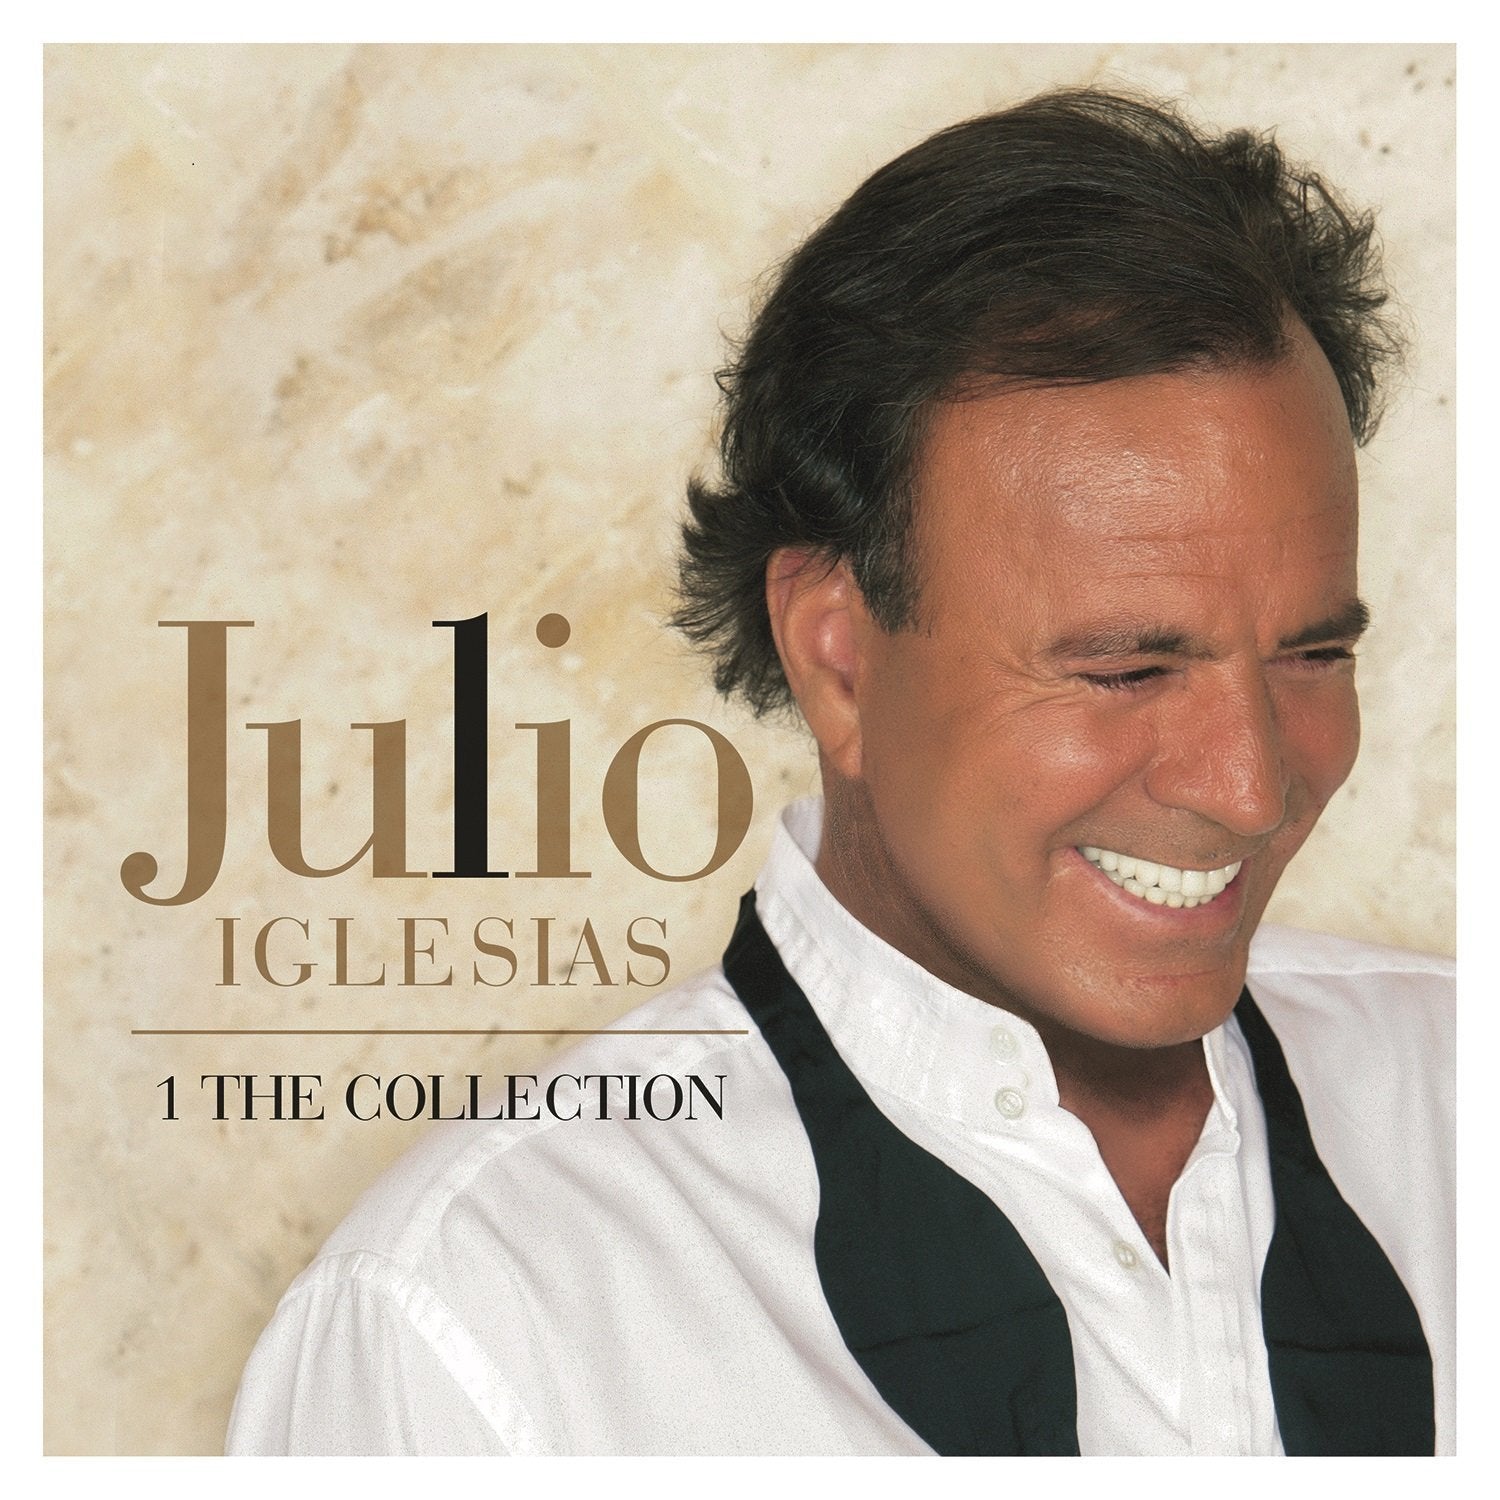 Julio Iglesias 1 The Collection CD (SONY)